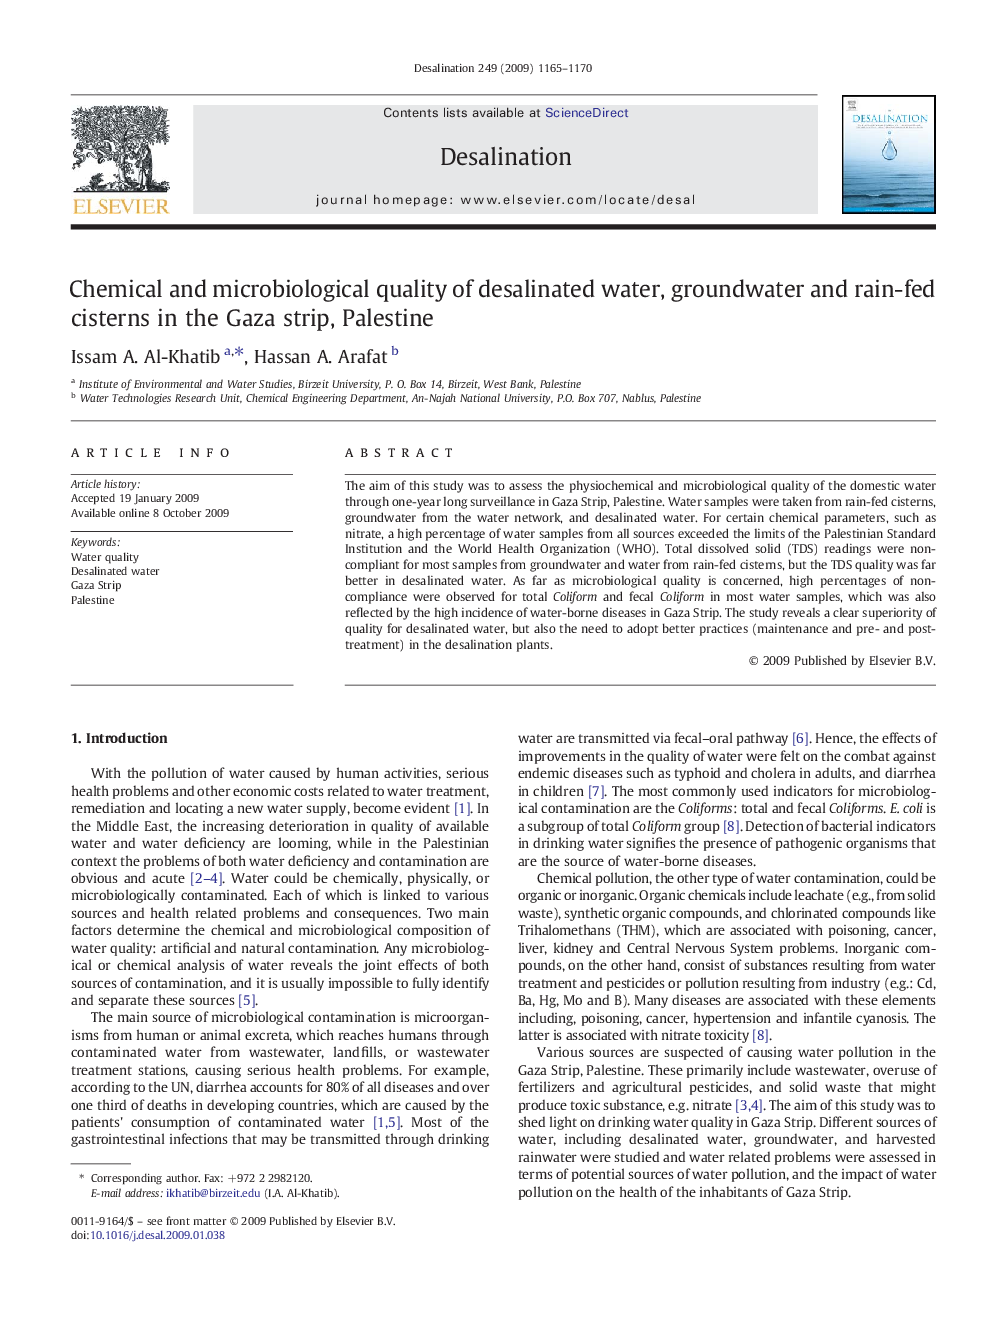 Chemical and microbiological quality of desalinated water, groundwater and rain-fed cisterns in the Gaza strip, Palestine